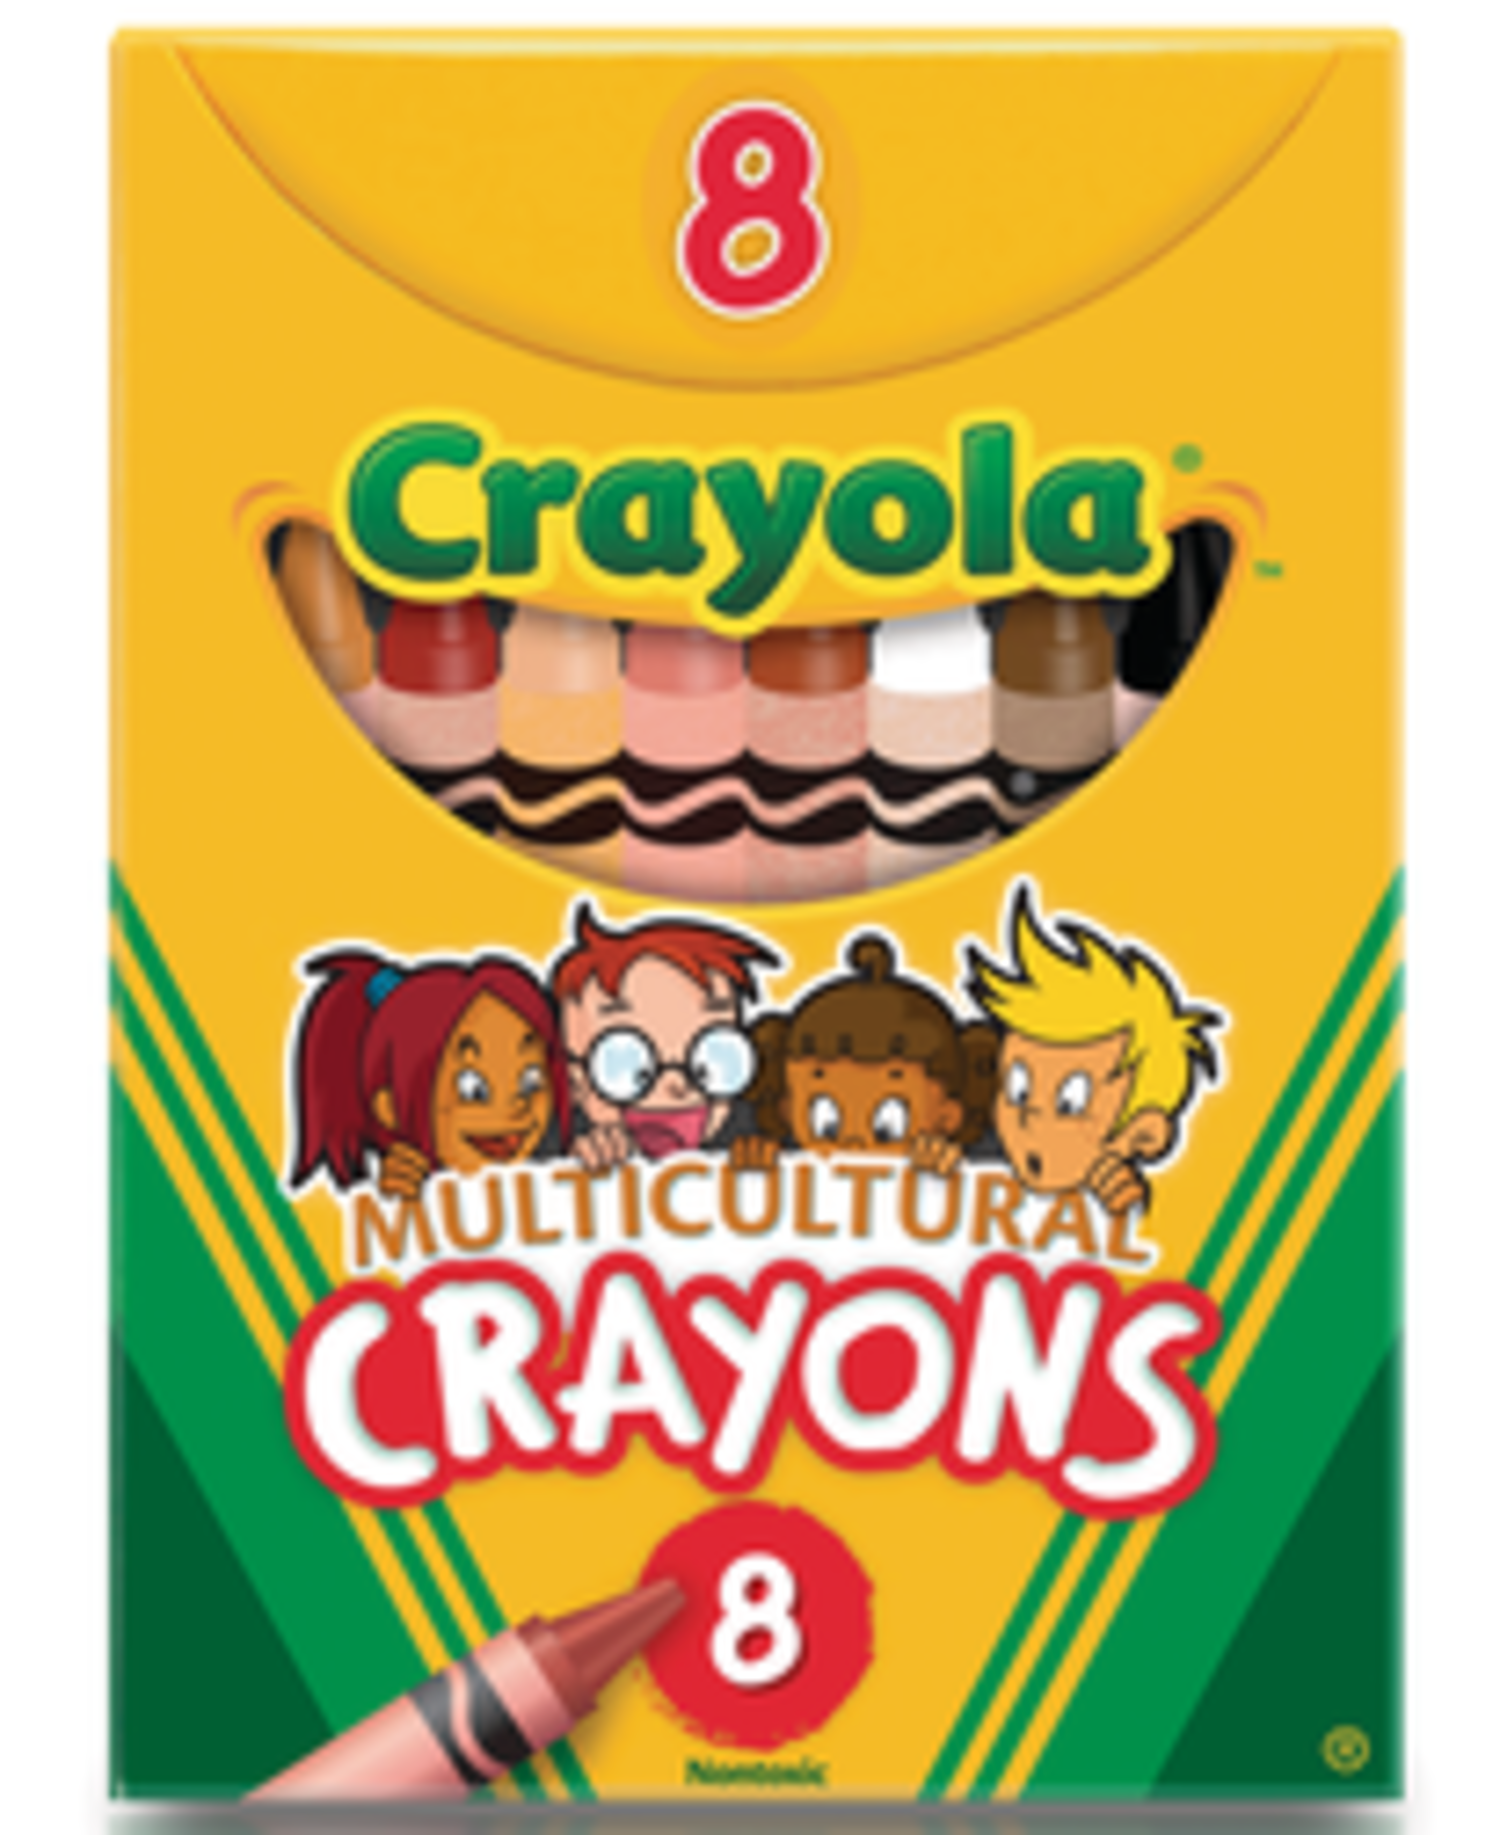 Crayola Multicultural Crayons, Large, Assorted - 8 pack